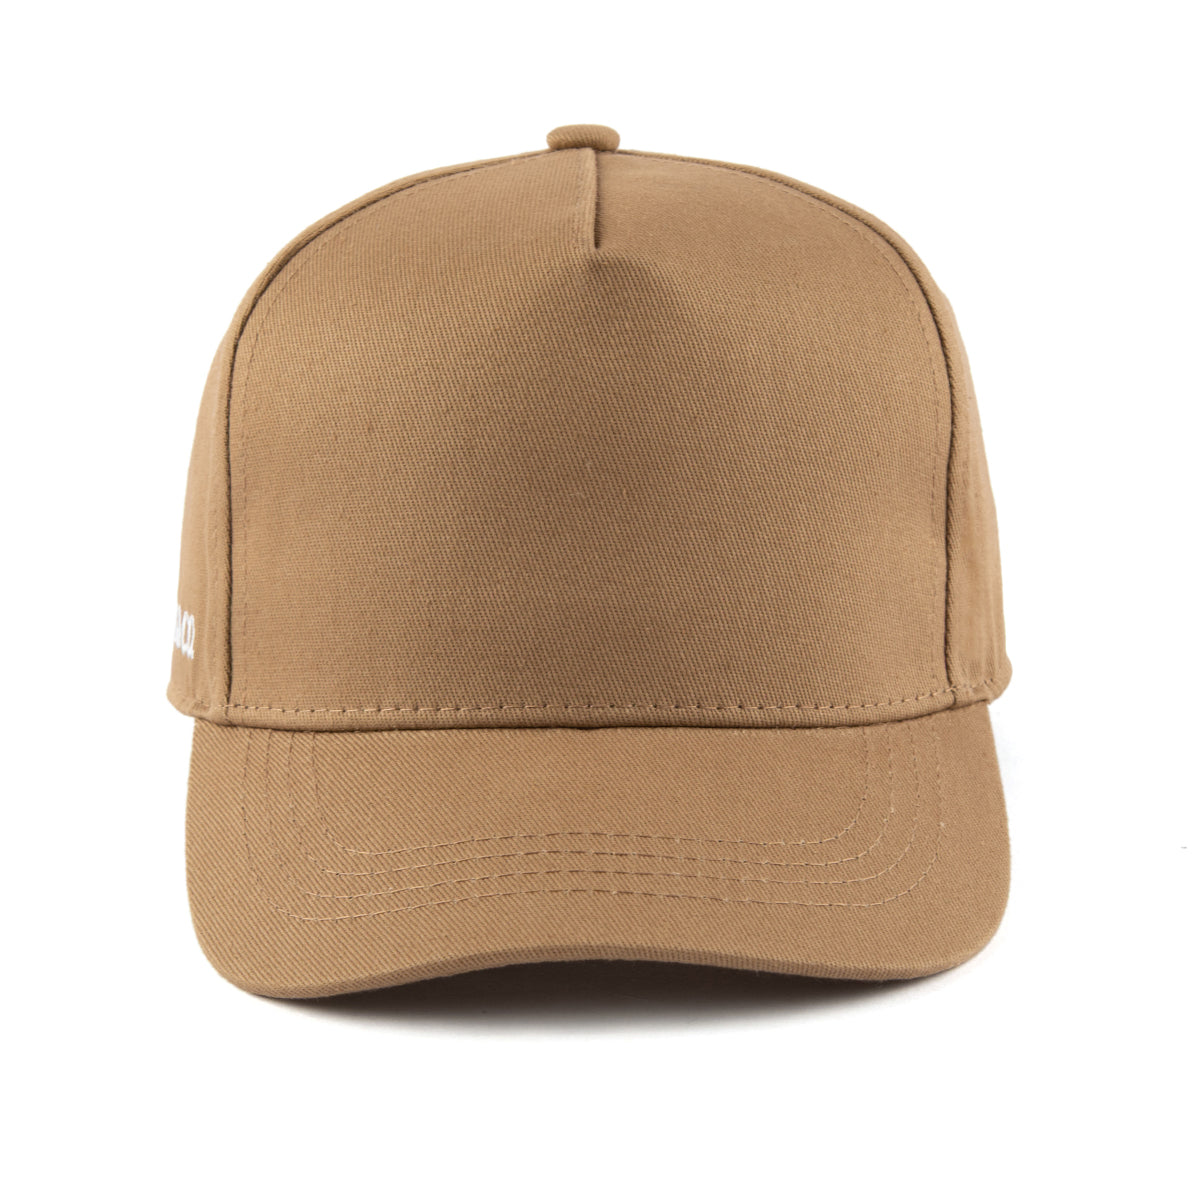 MOCHA BASEBALL CAP: Available in Baby - Adult Sizes - Cubs & Co.